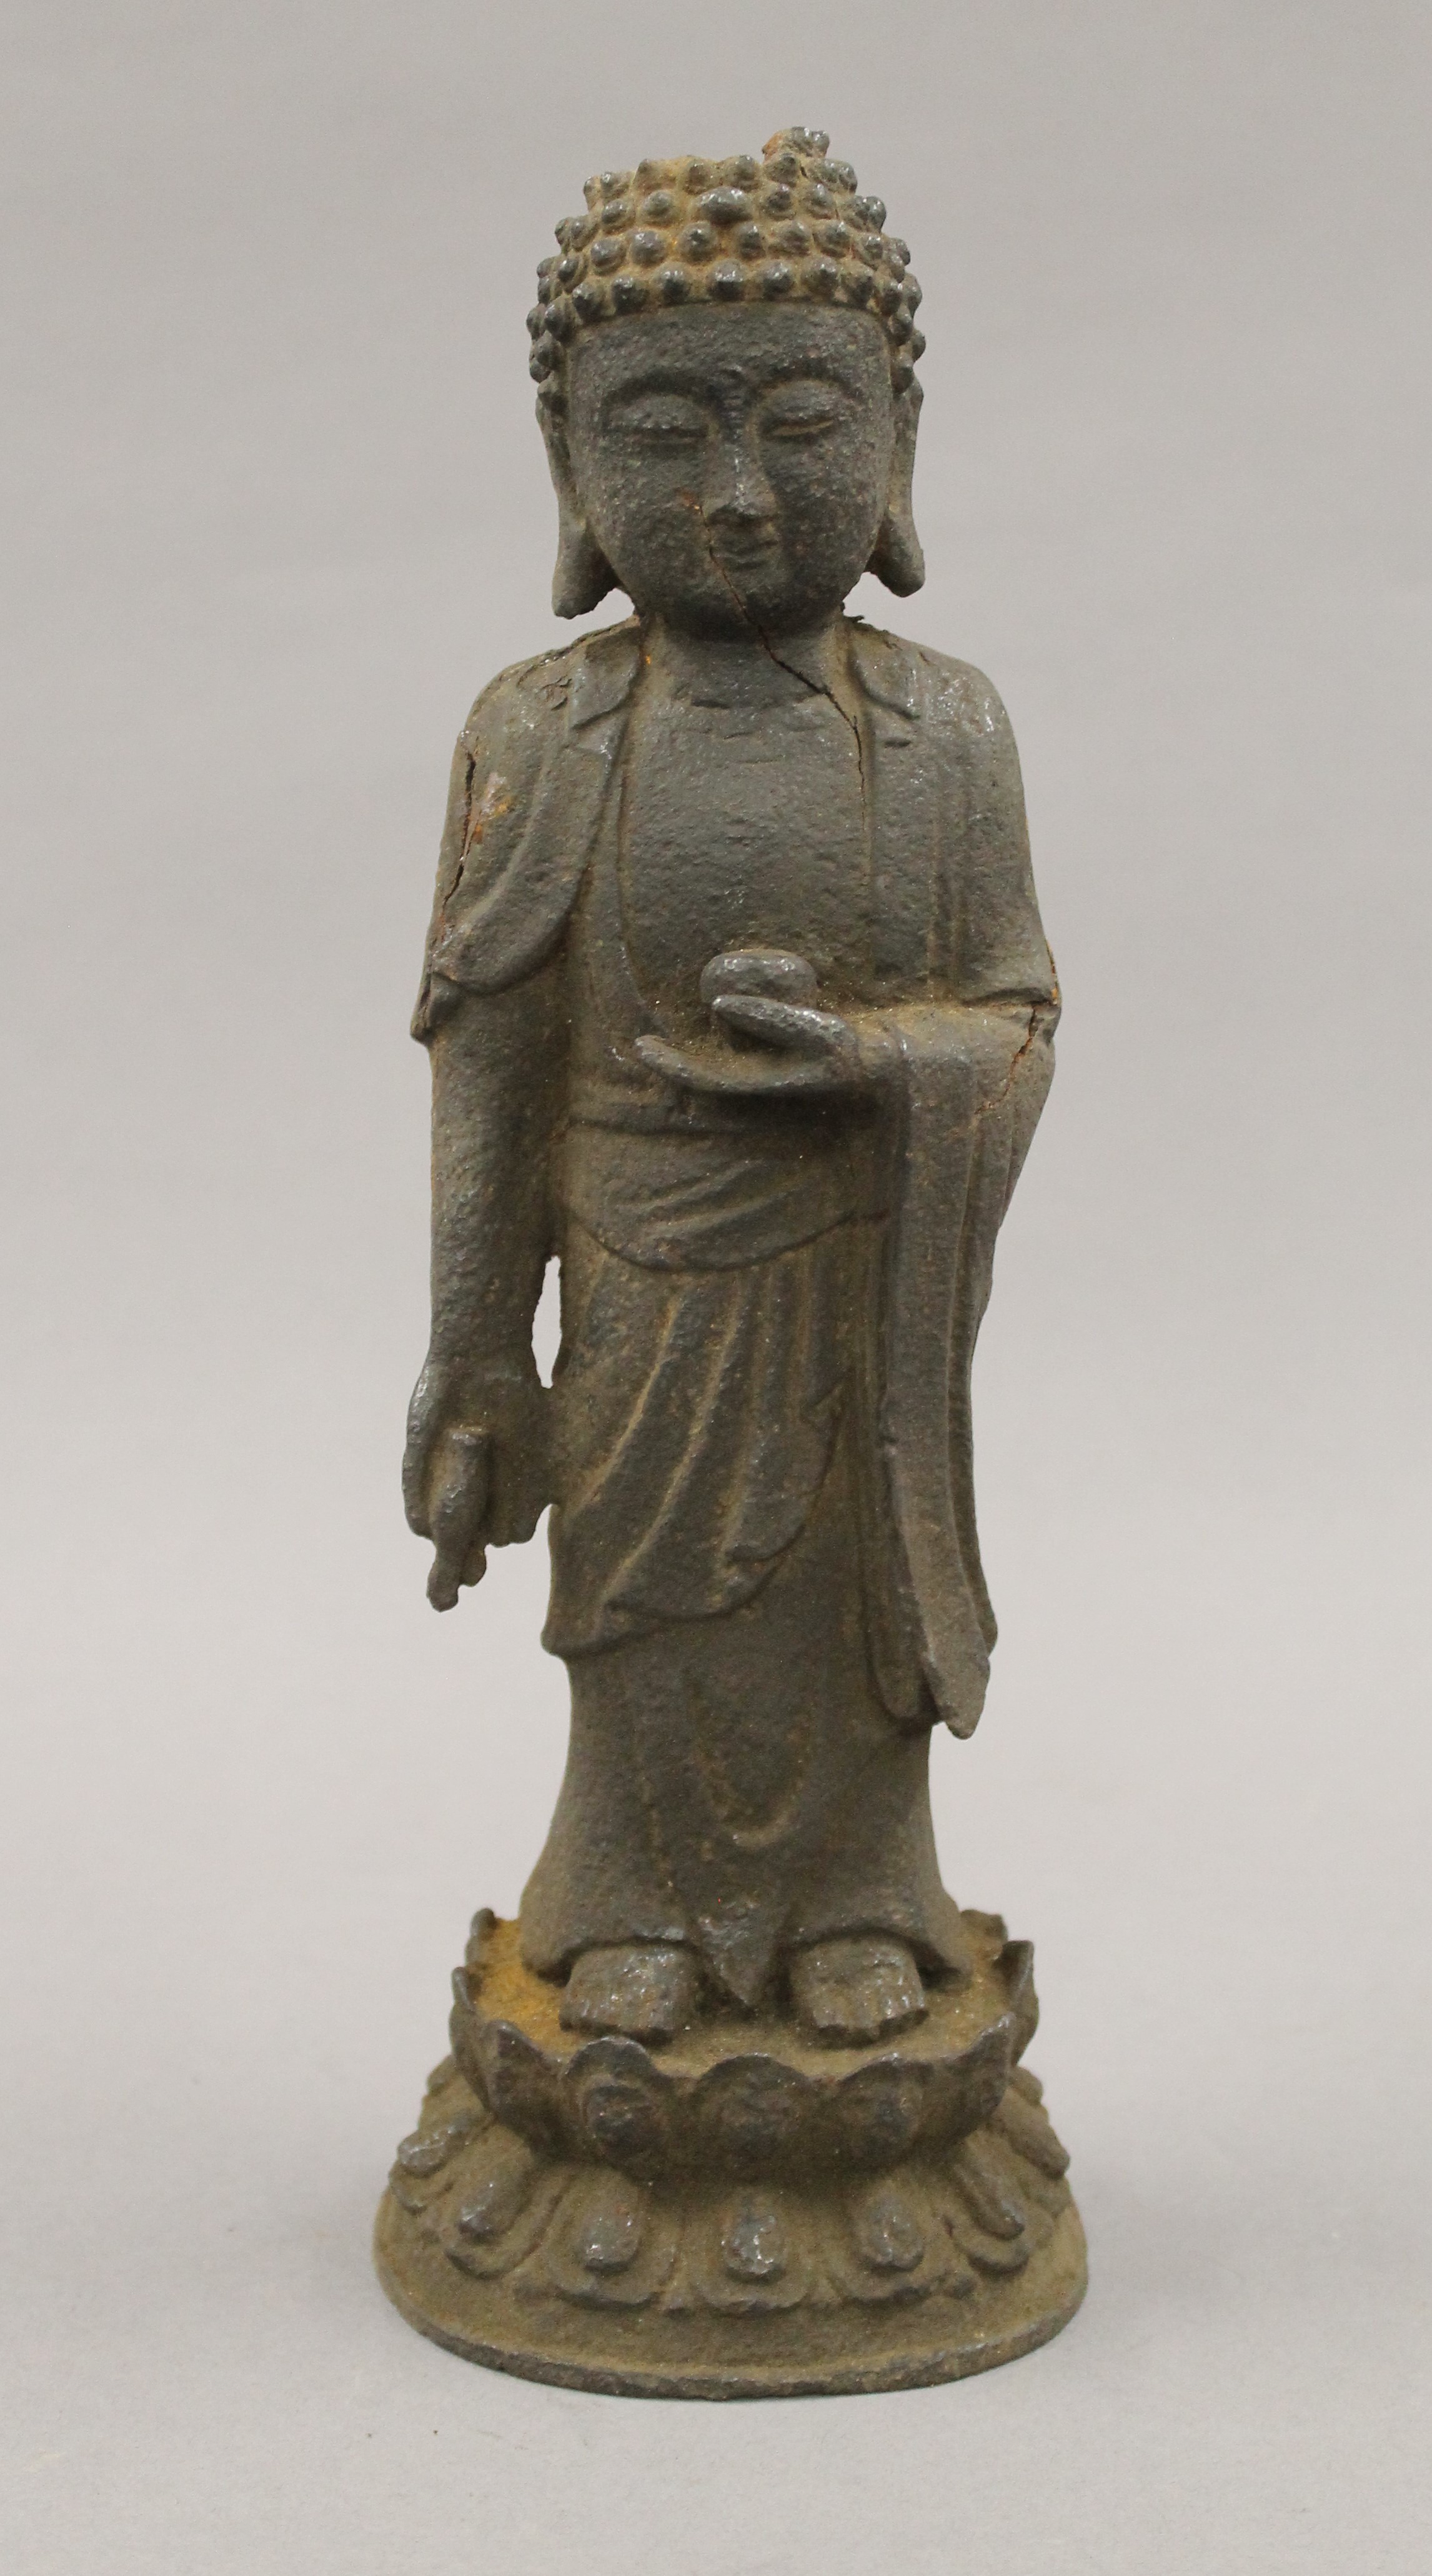 An antique Chinese iron model of buddha. 27 cm high.